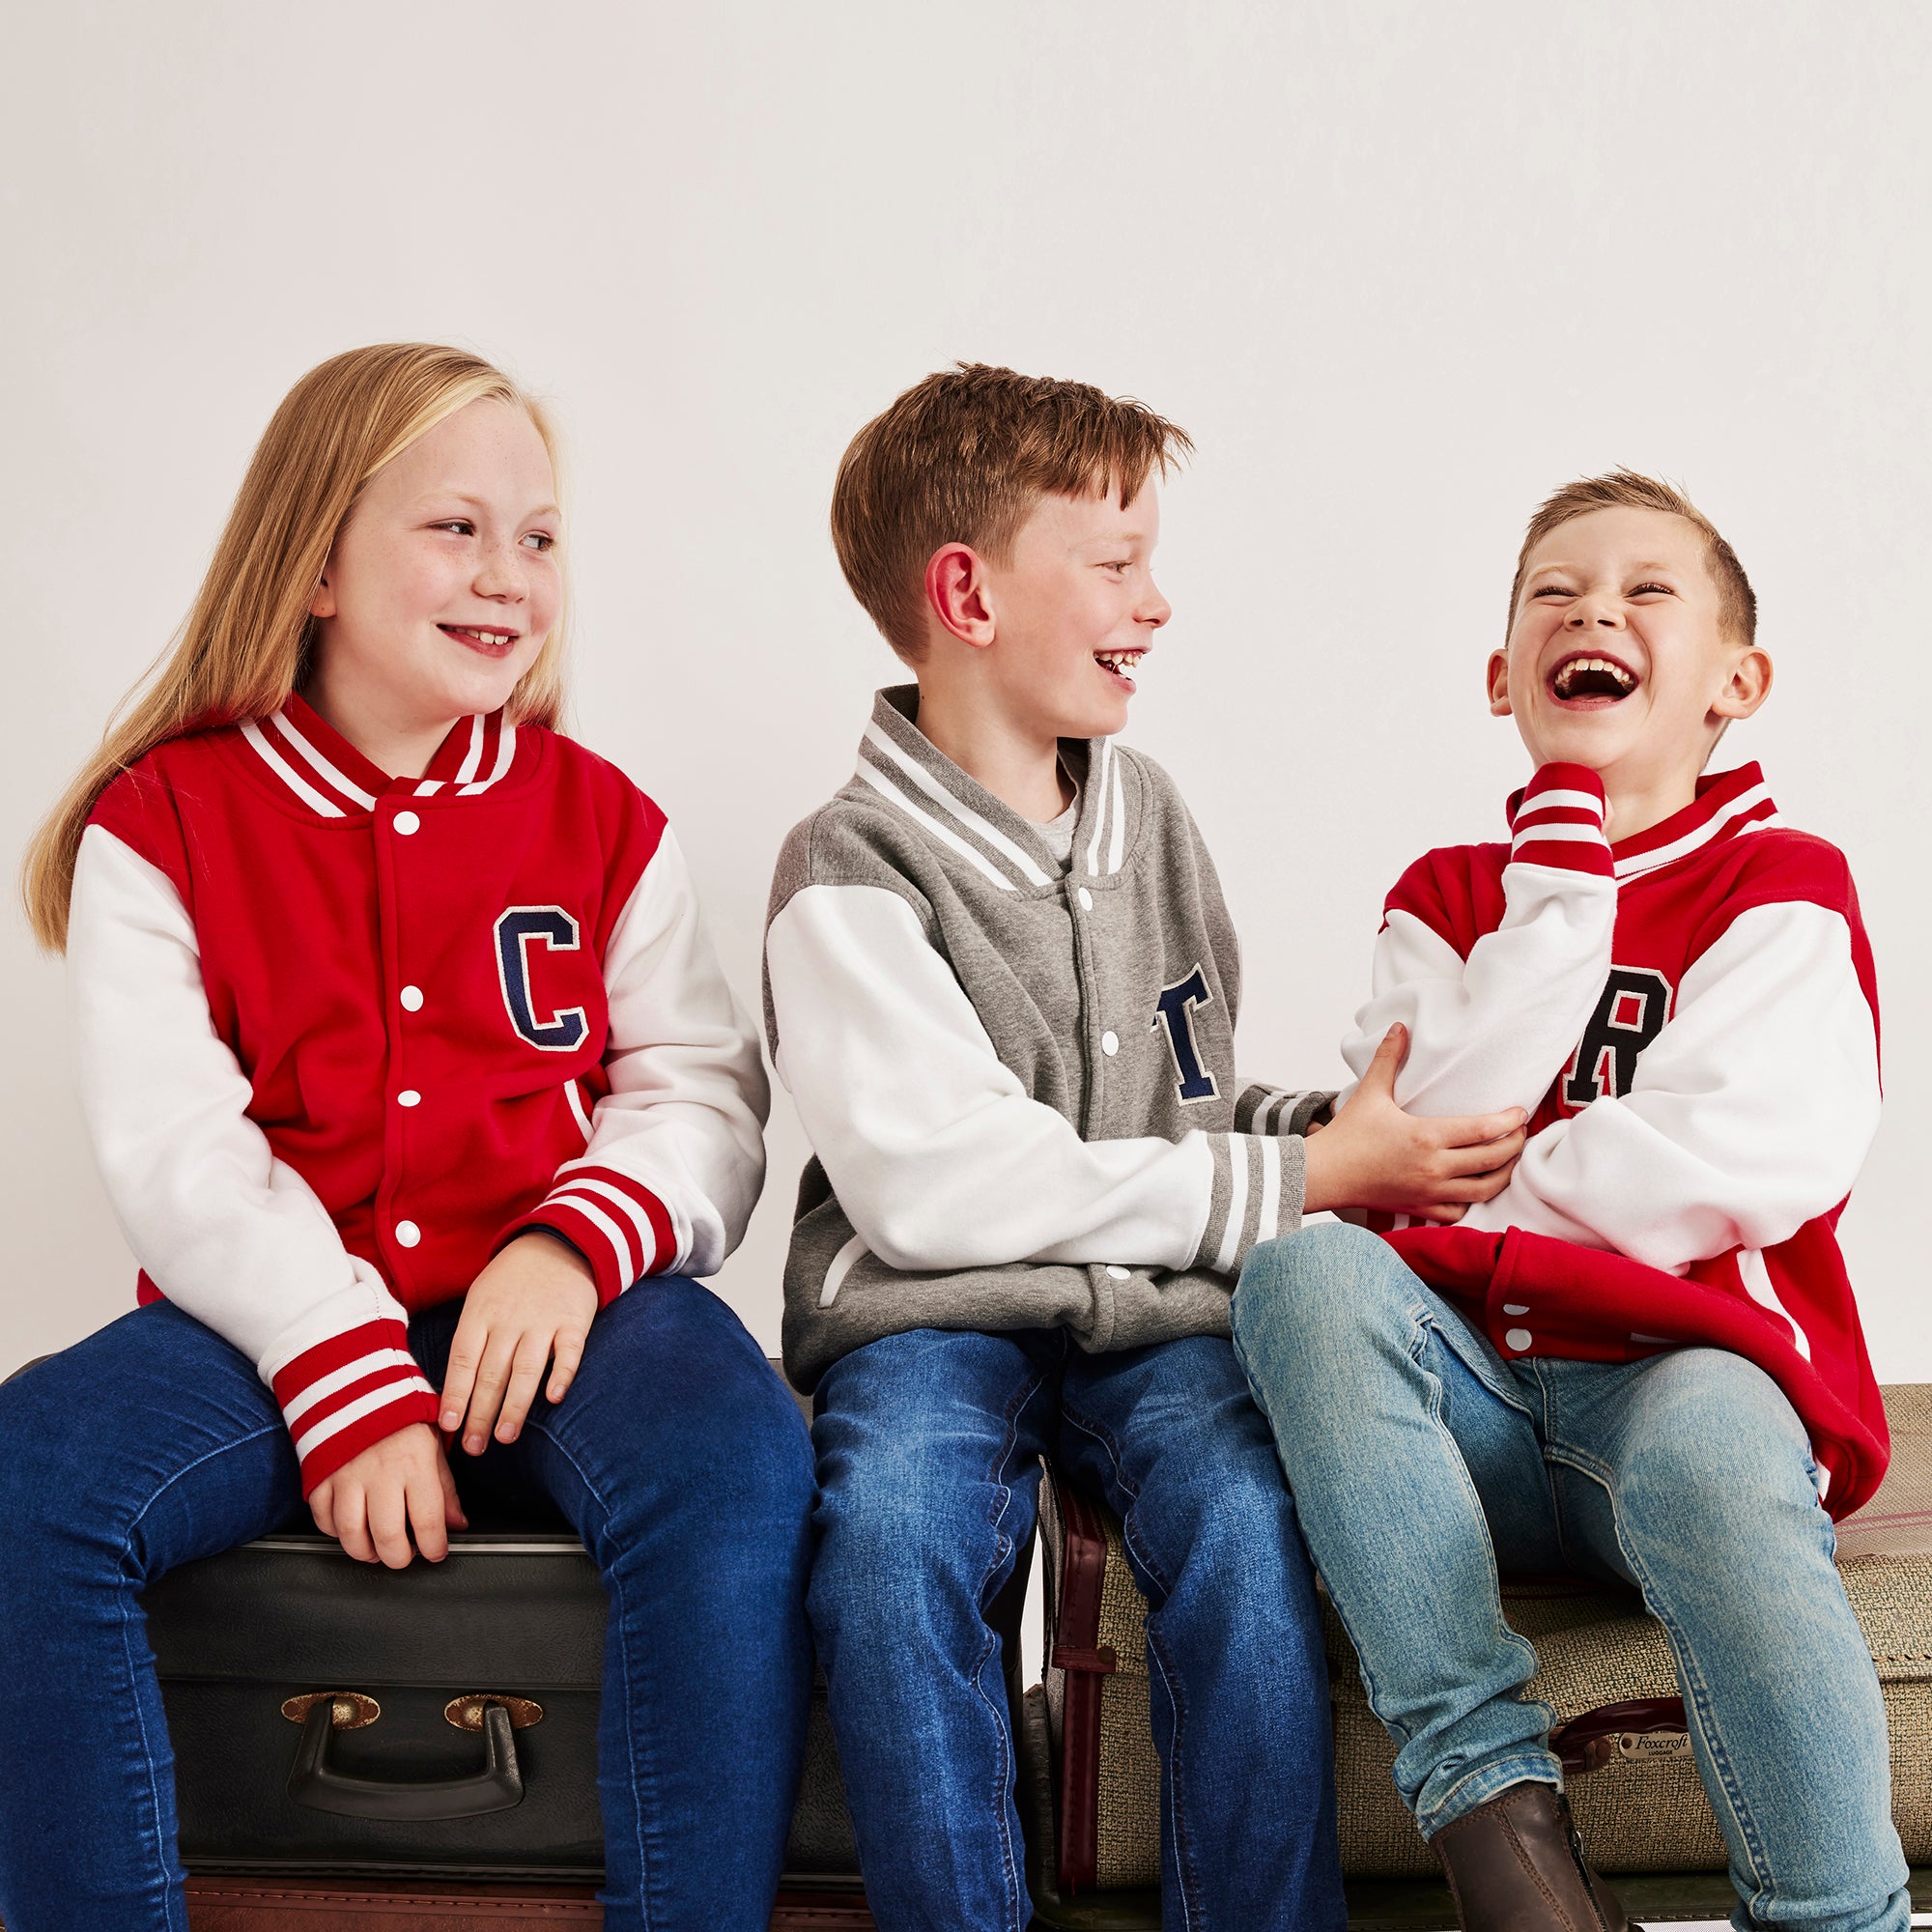 Personalised Child's Varsity Jacket By Simply Colors